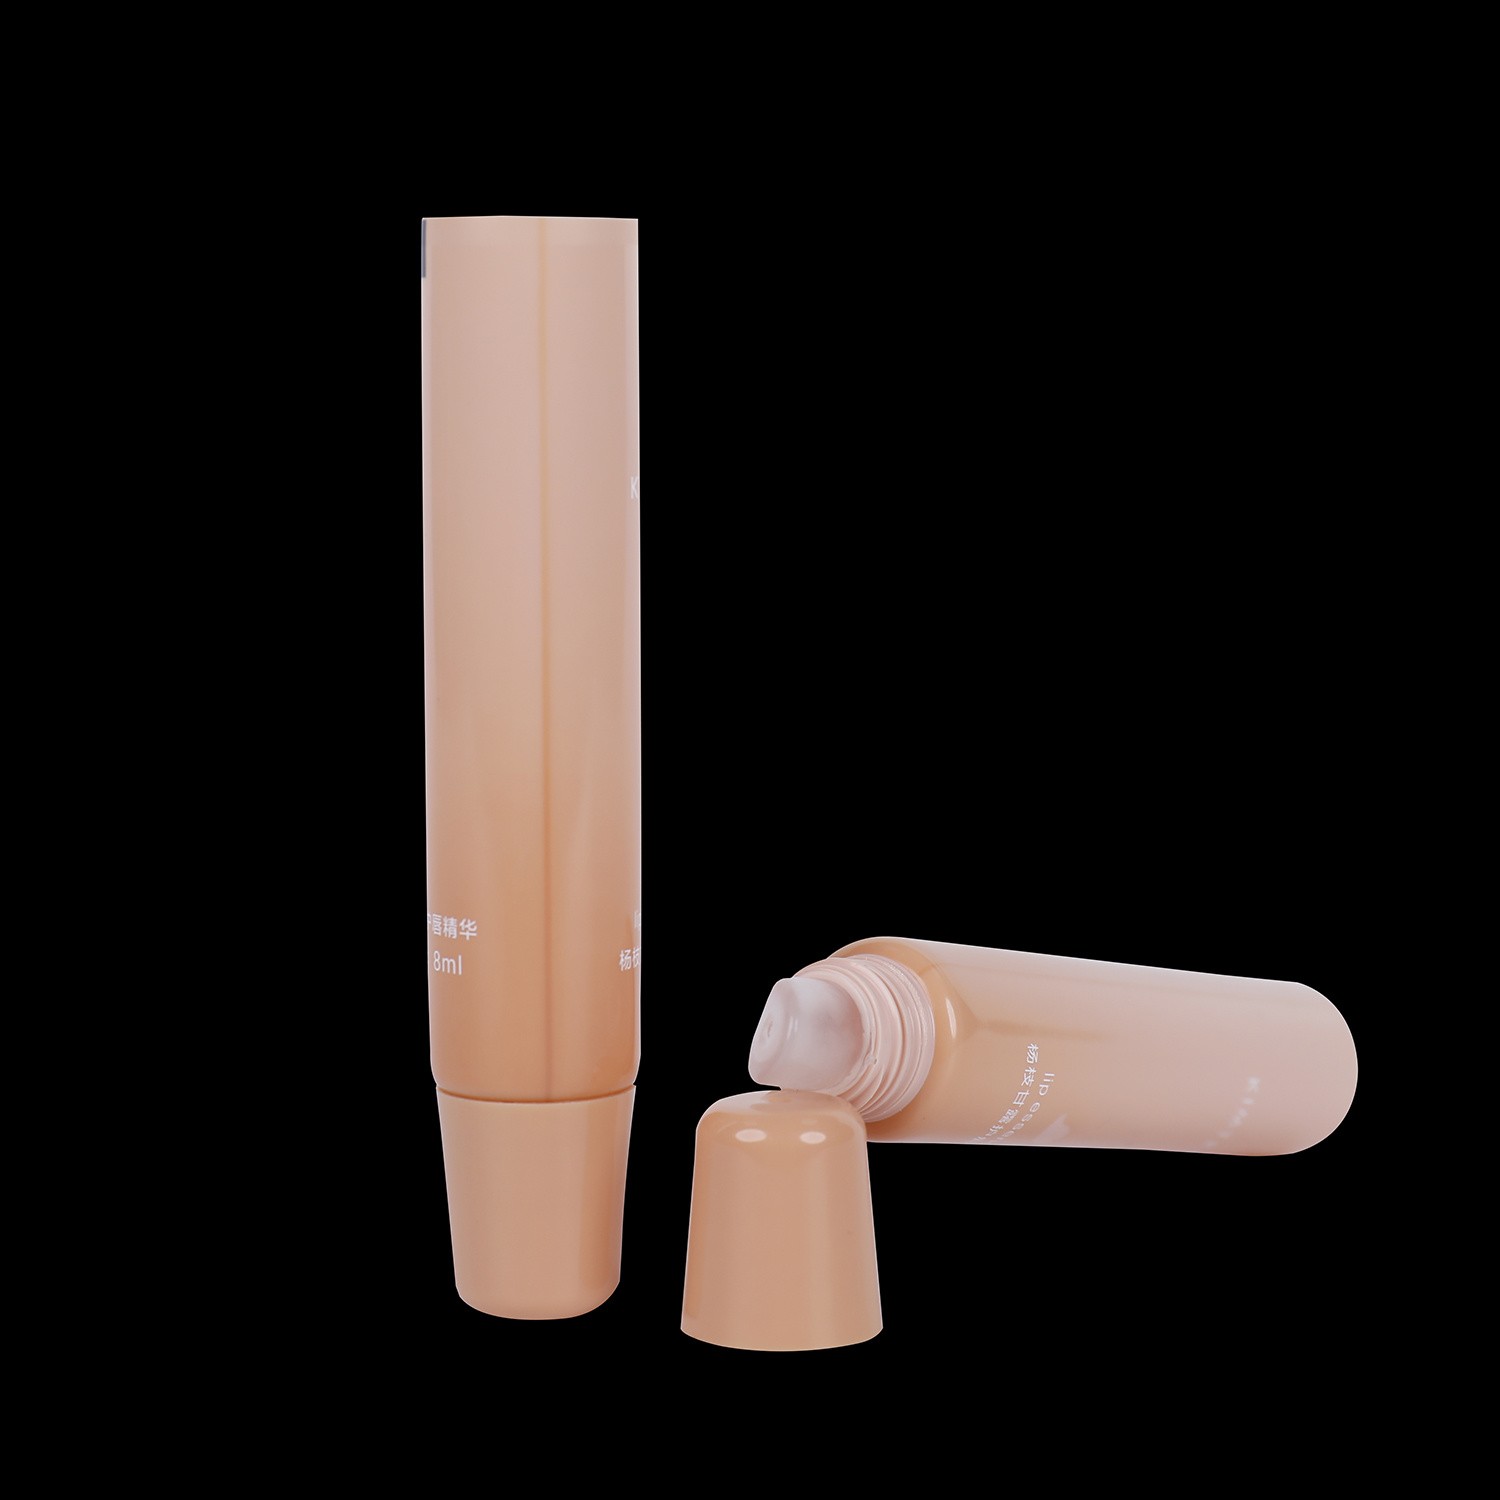 Skin Care Bullet Luxury Gold White Gloss Surface Wholesale Lipgloss Squeeze Empty Lipstick Squeeze Lip Gloss Tubes